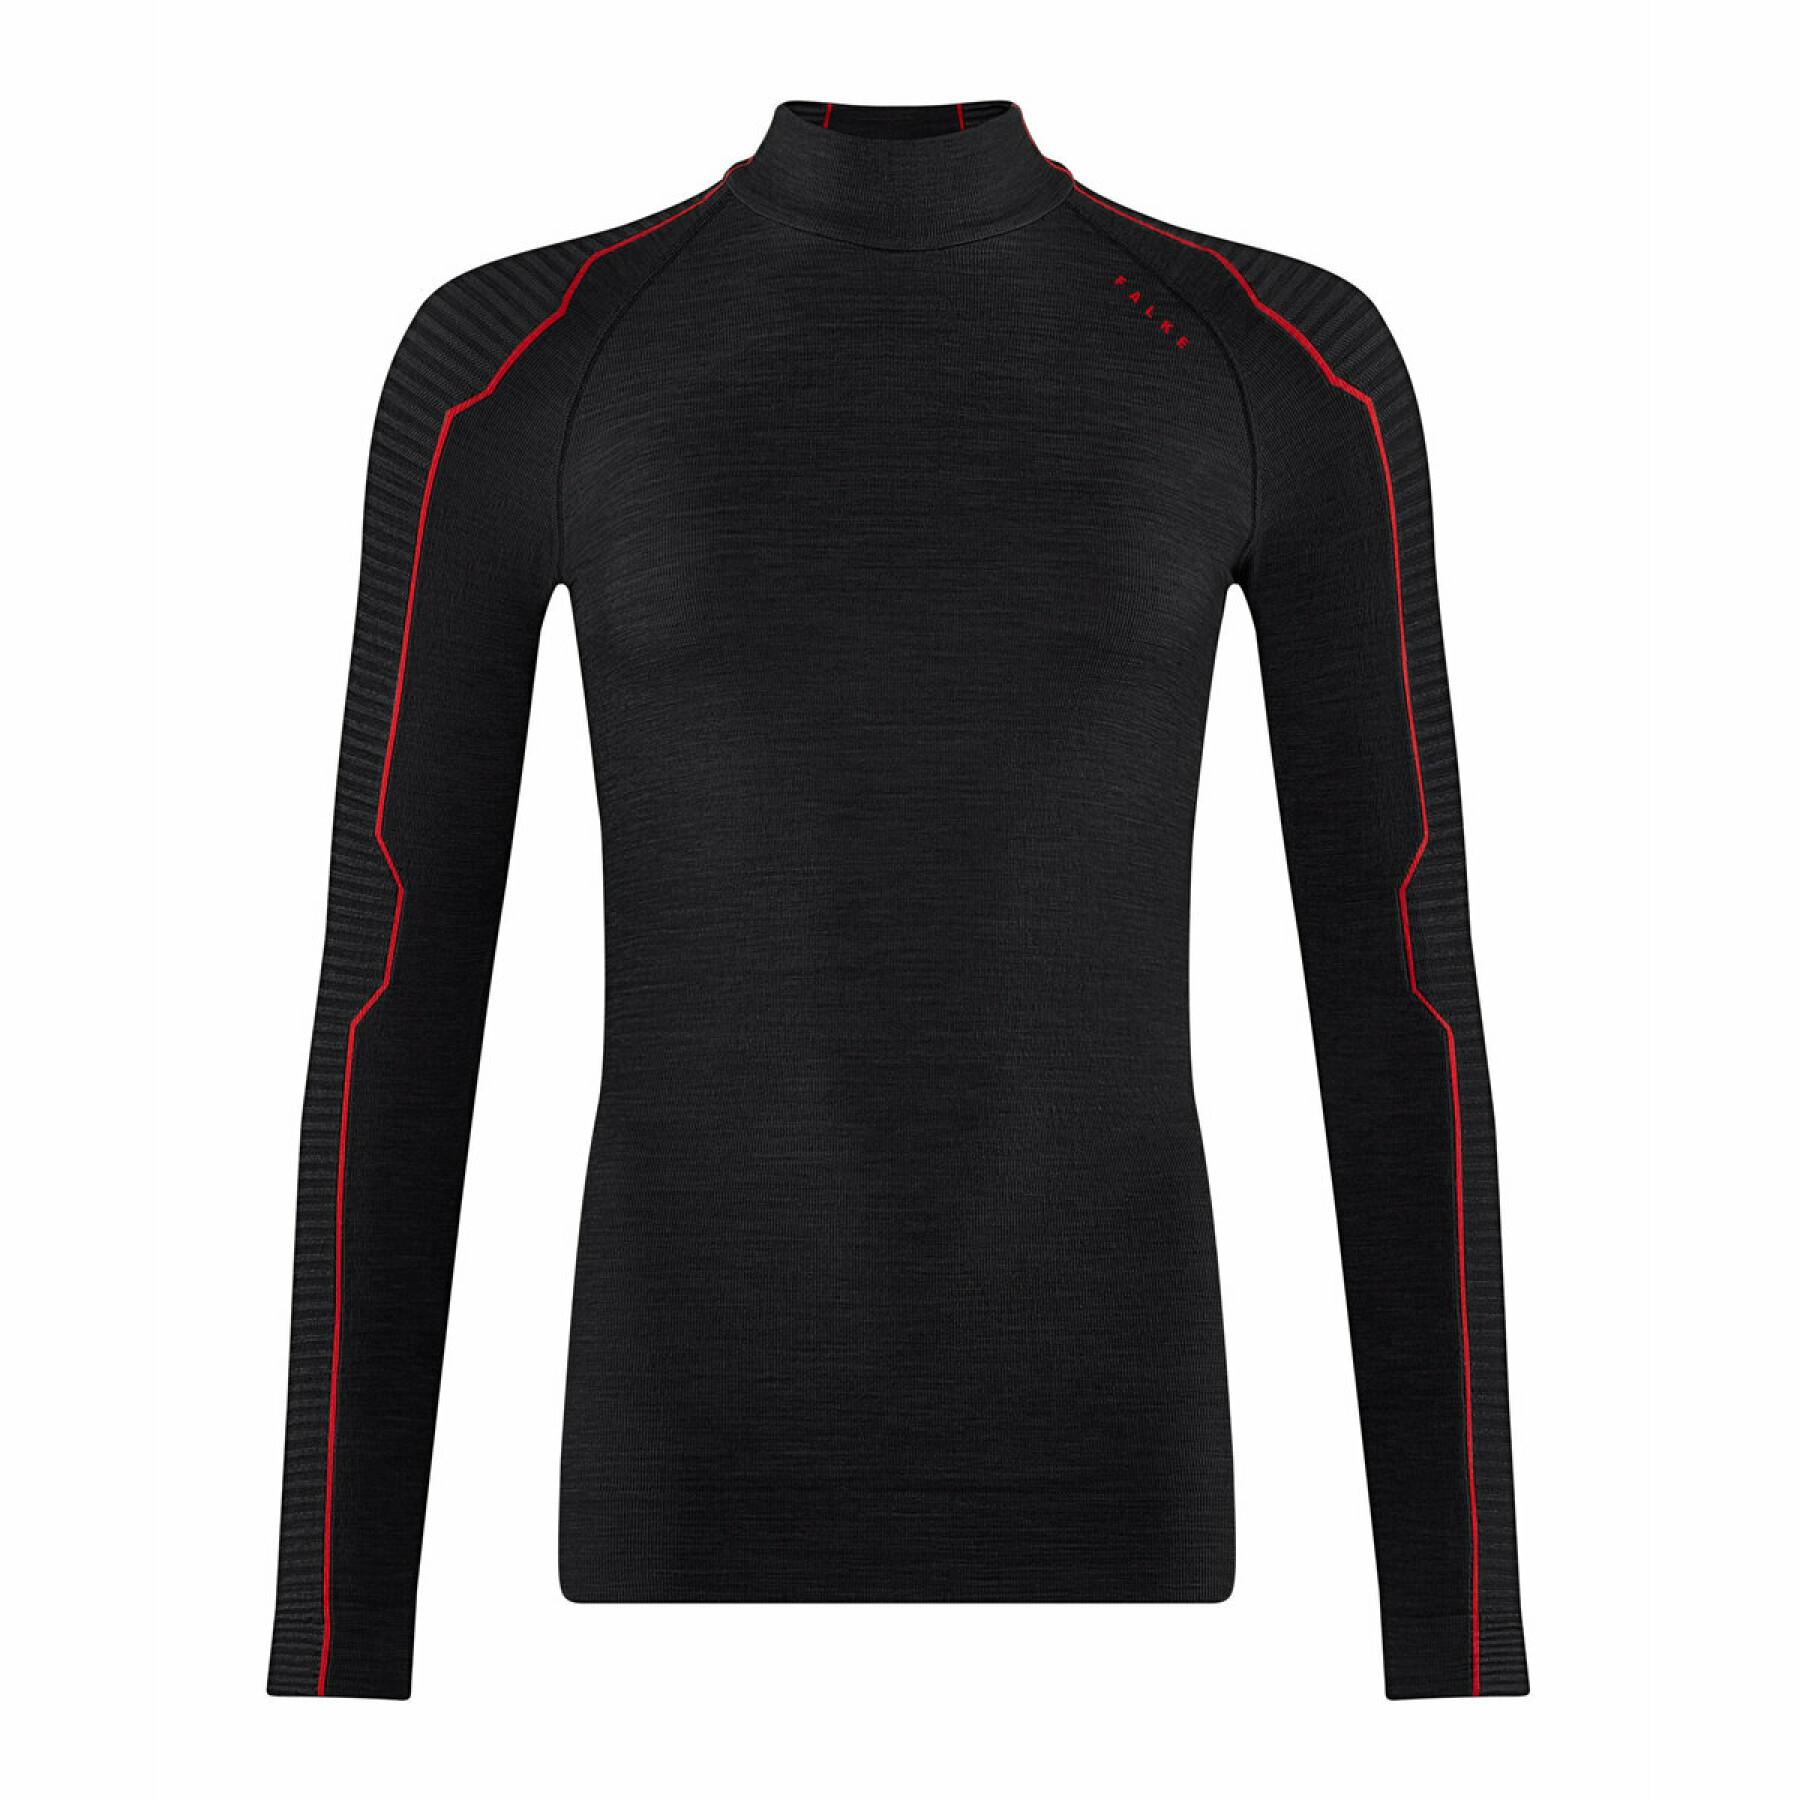 Maillot femme Trend manches longues Wool-Tech